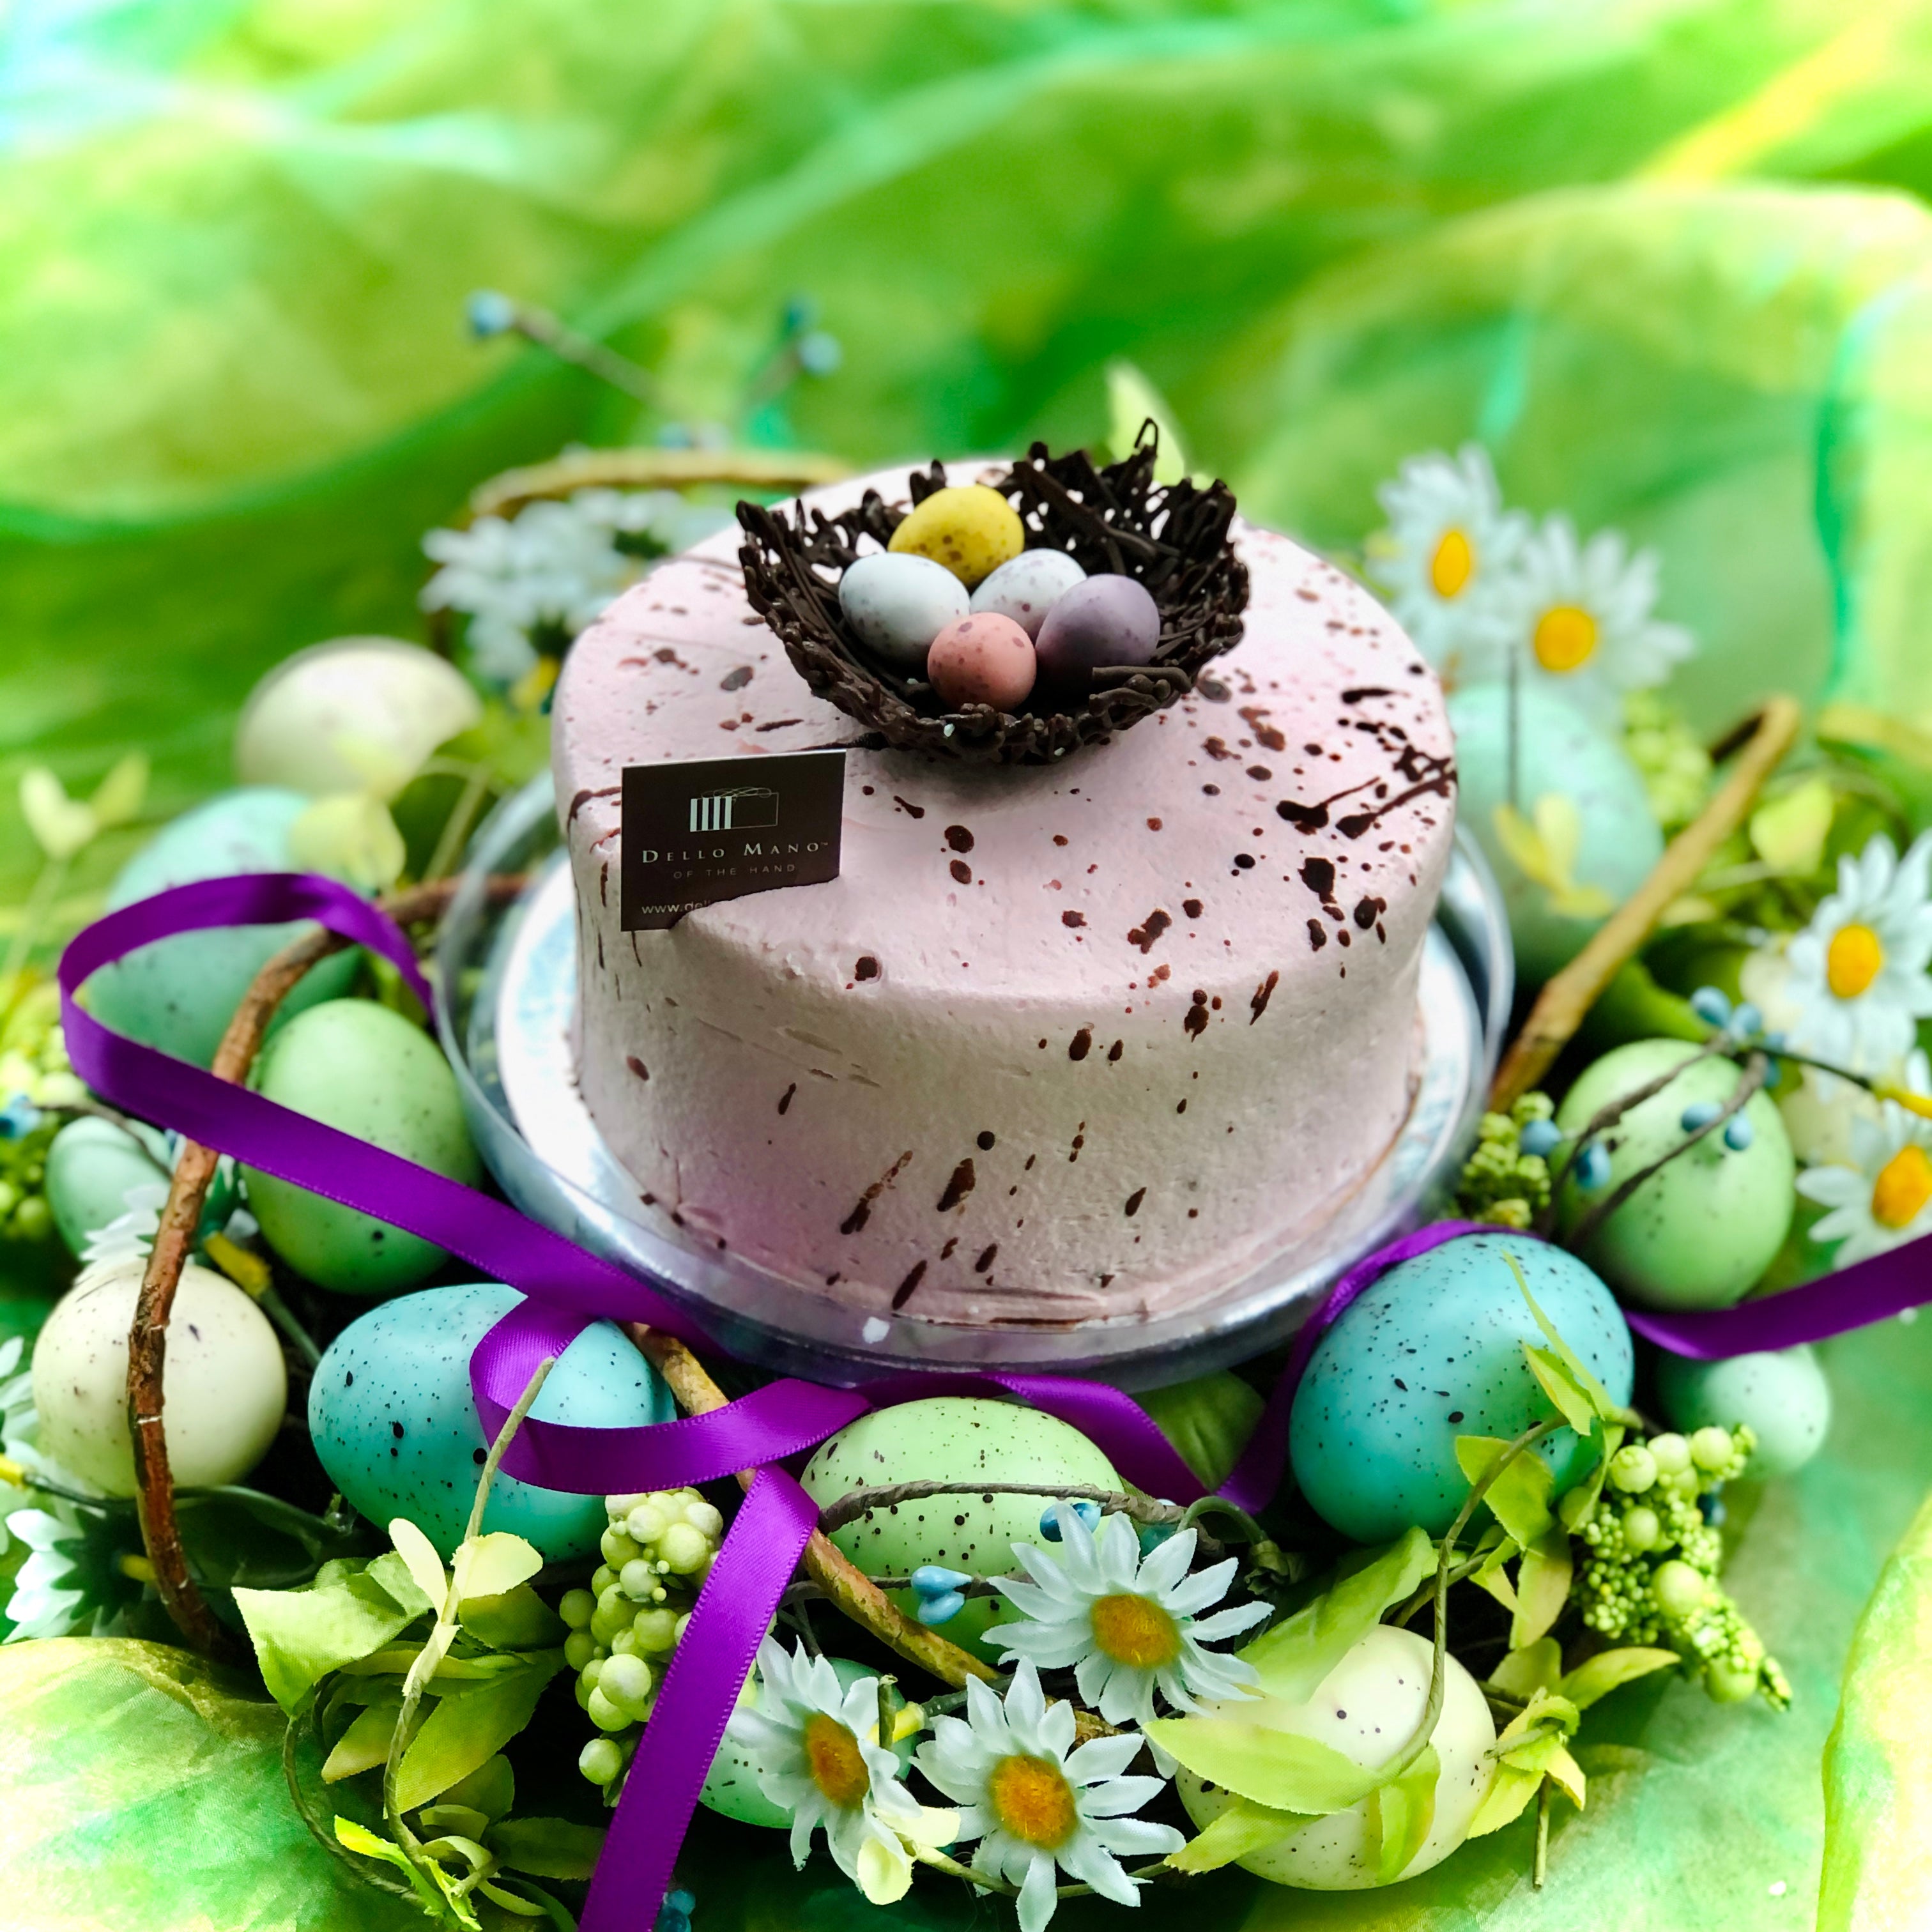 A dusty pink cake speckled with chocolate flecks and a chocolate nest with easter eggs on top.